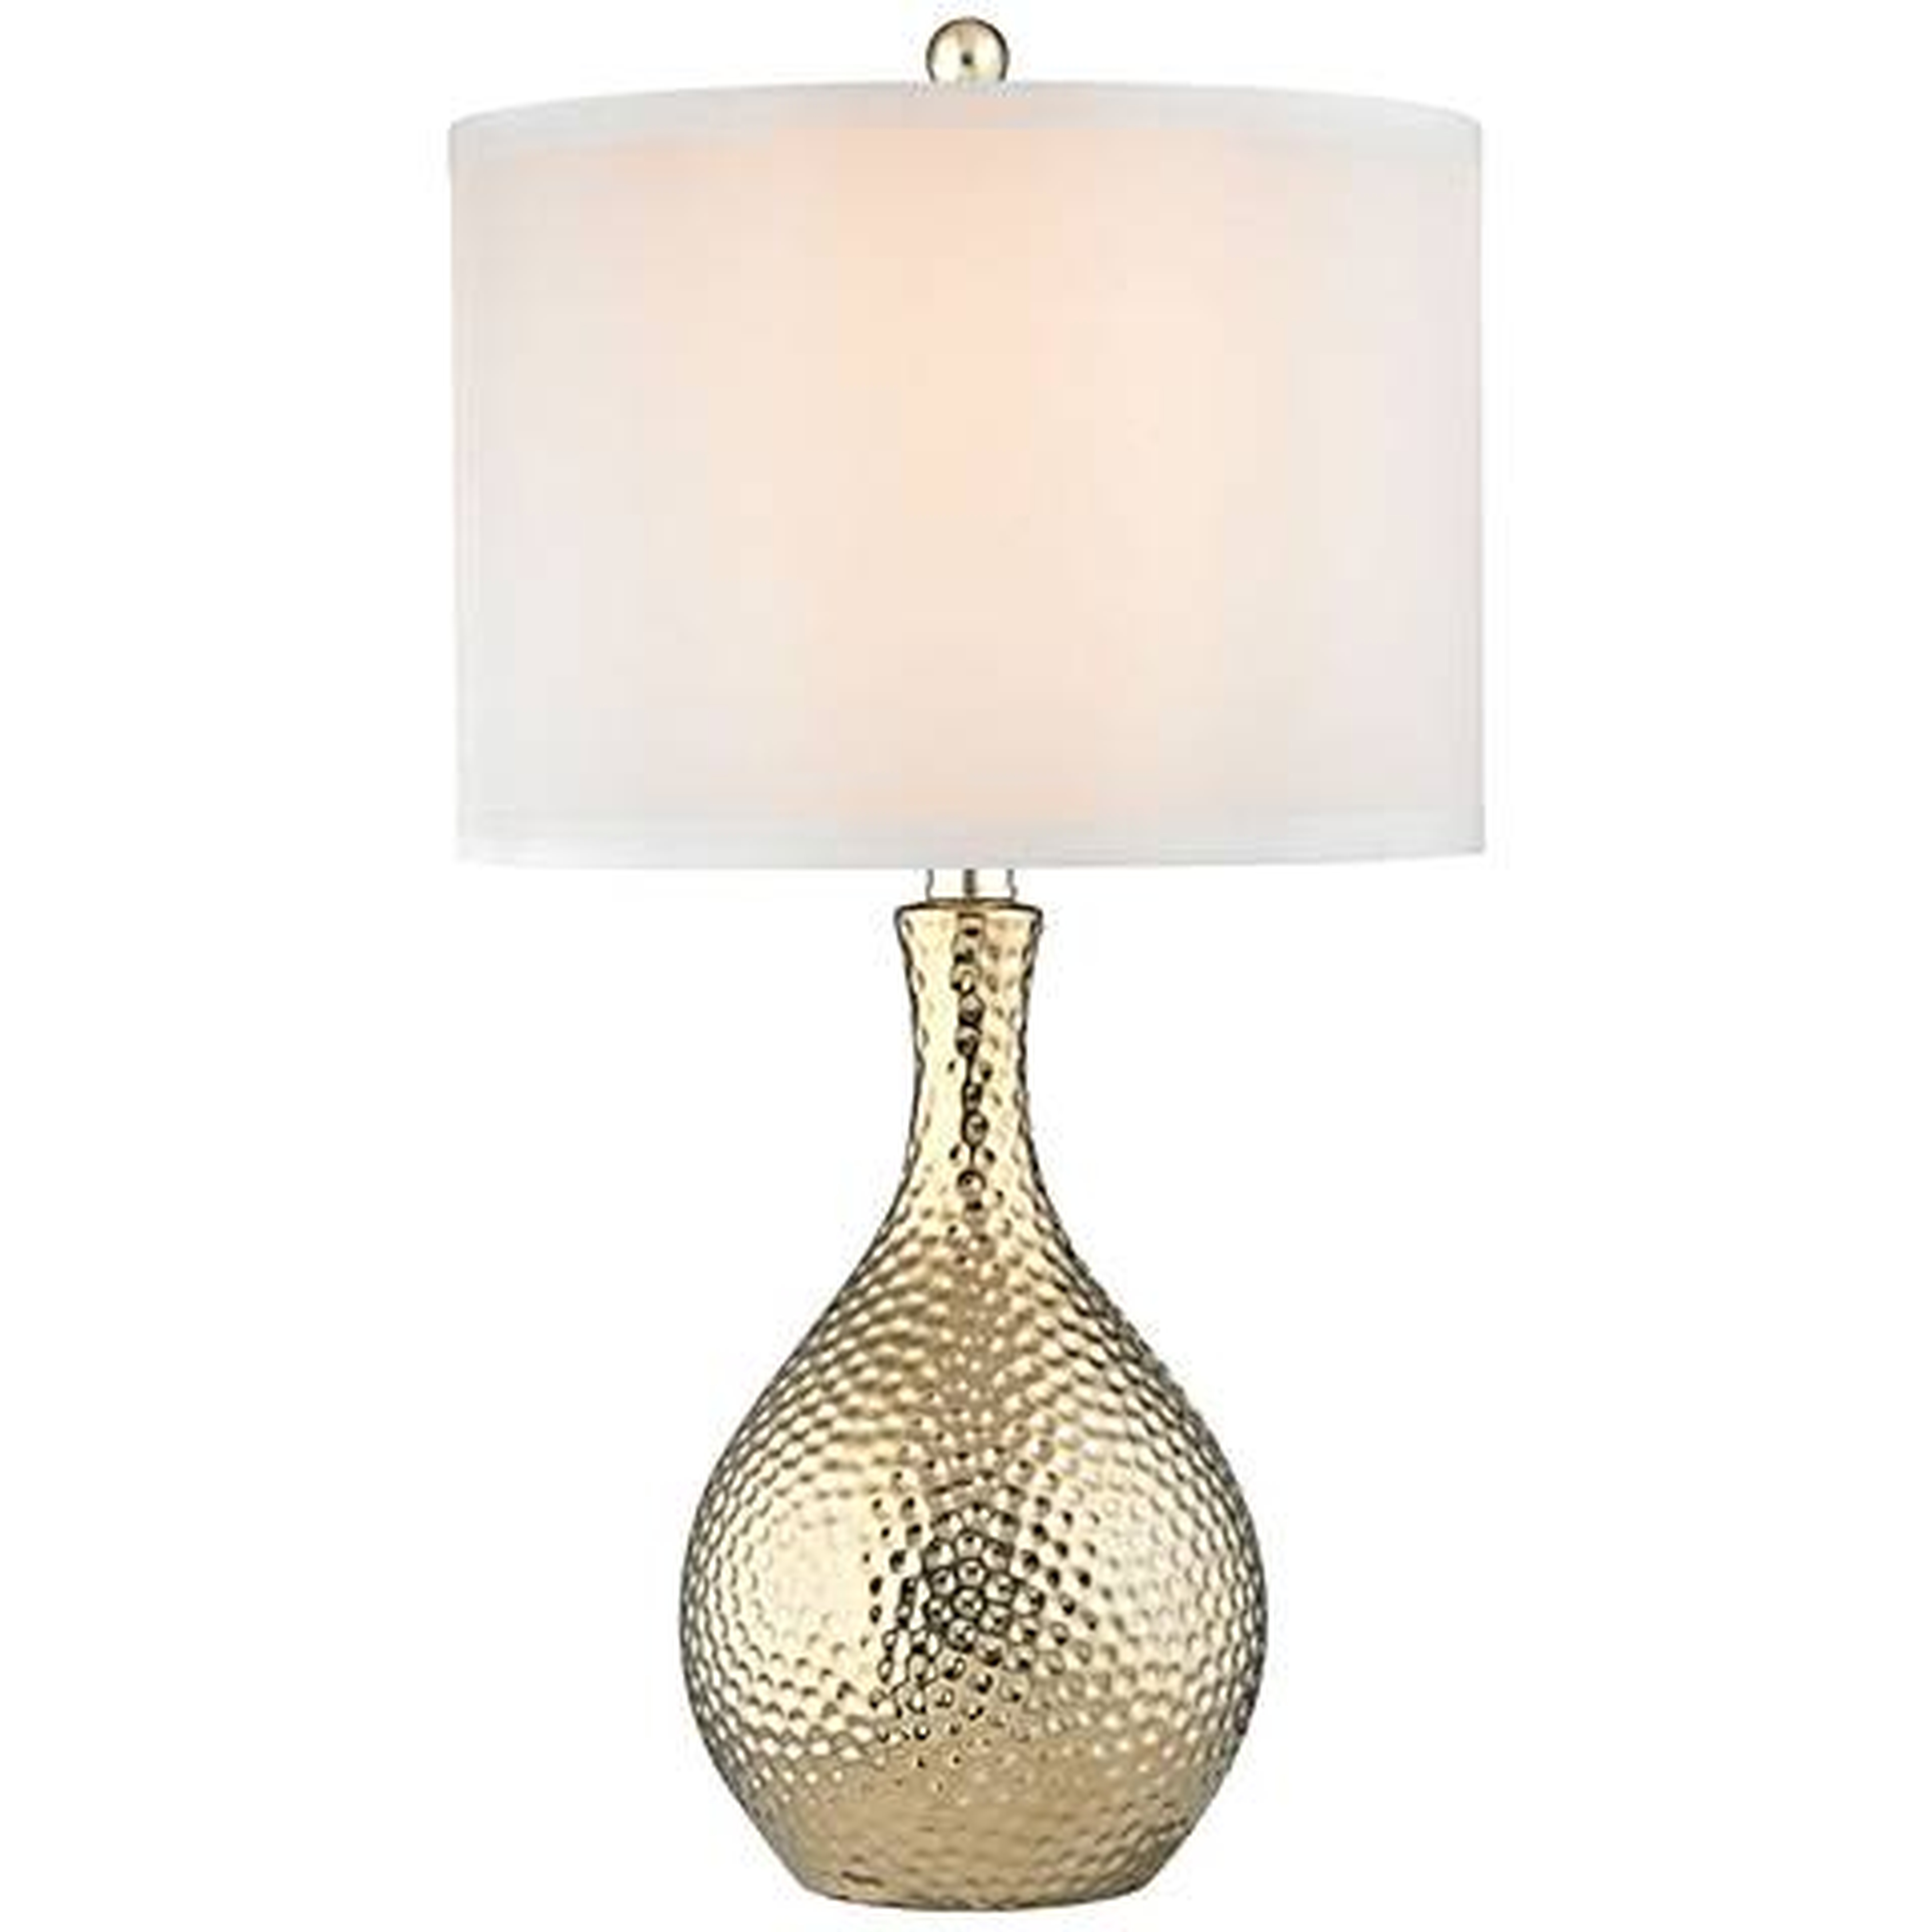 Dimond Soleil Gold Plate Hammered Ceramic Table Lamp - Lamps Plus